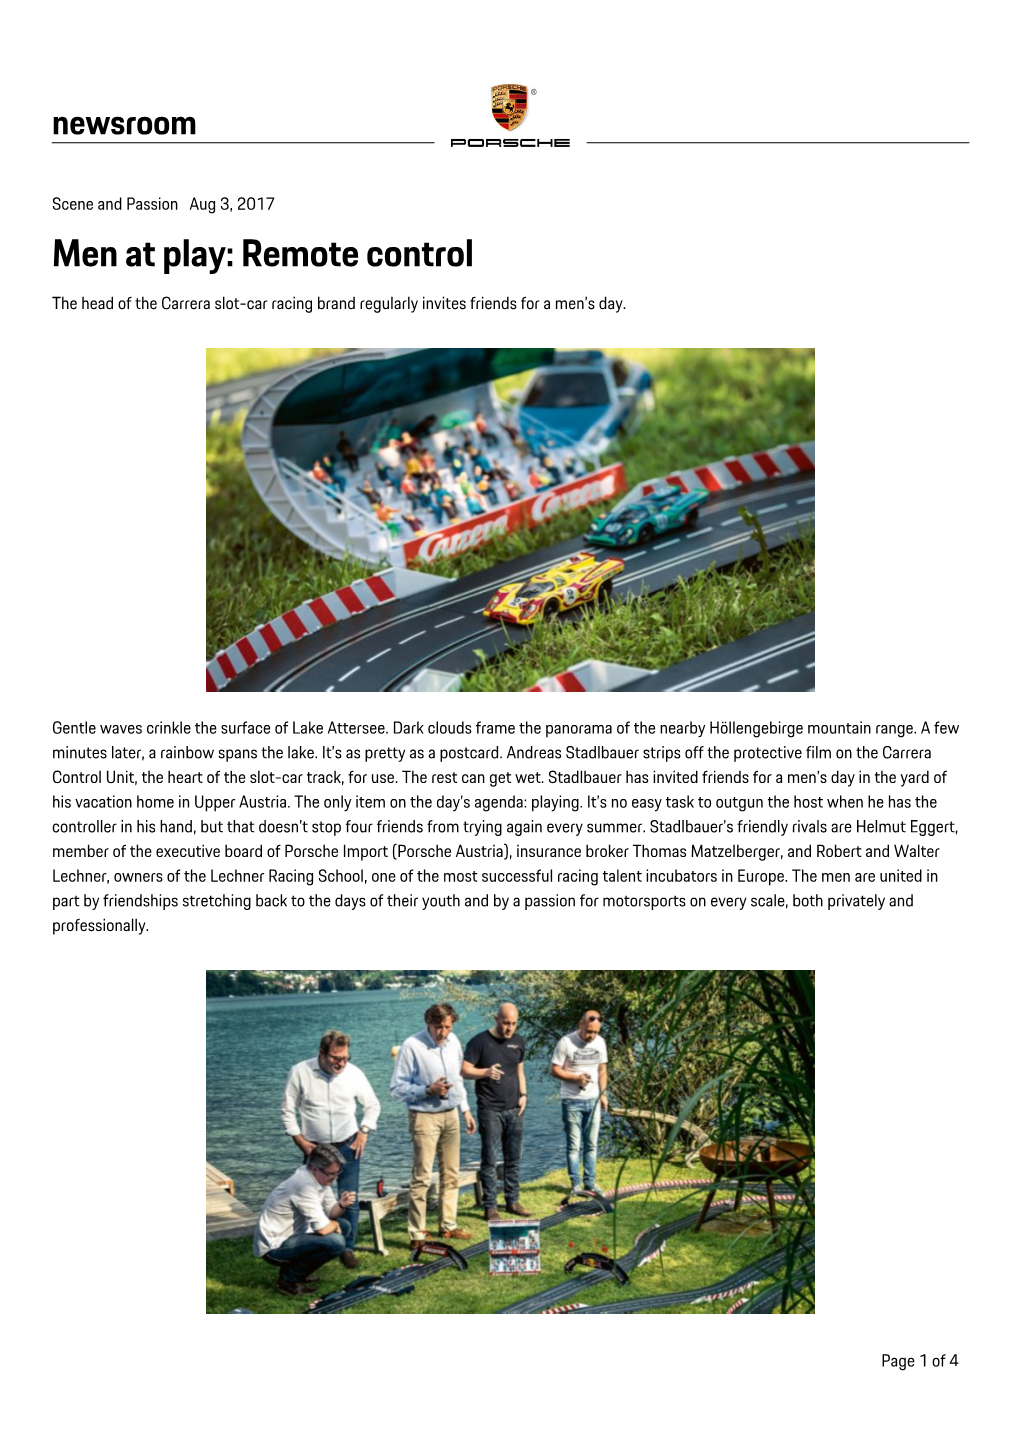 Men at Play: Remote Control the Head of the Carrera Slot-Car Racing Brand Regularly Invites Friends for a Men’S Day